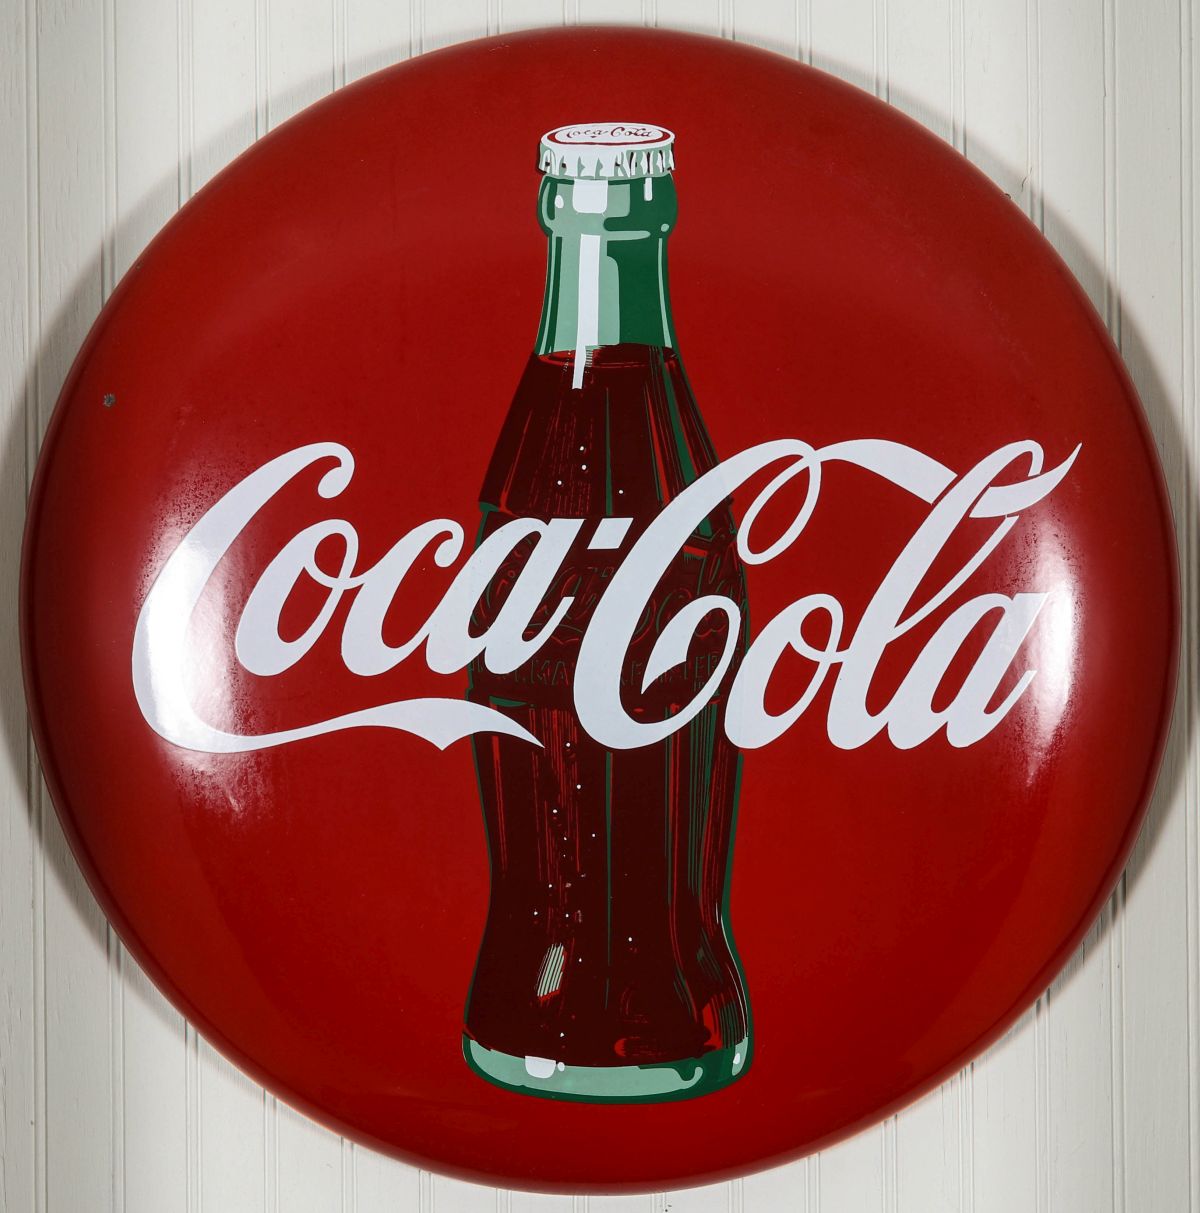 A 24-INCH COCA-COLA BUTTON SIGN WITH BOTTLE